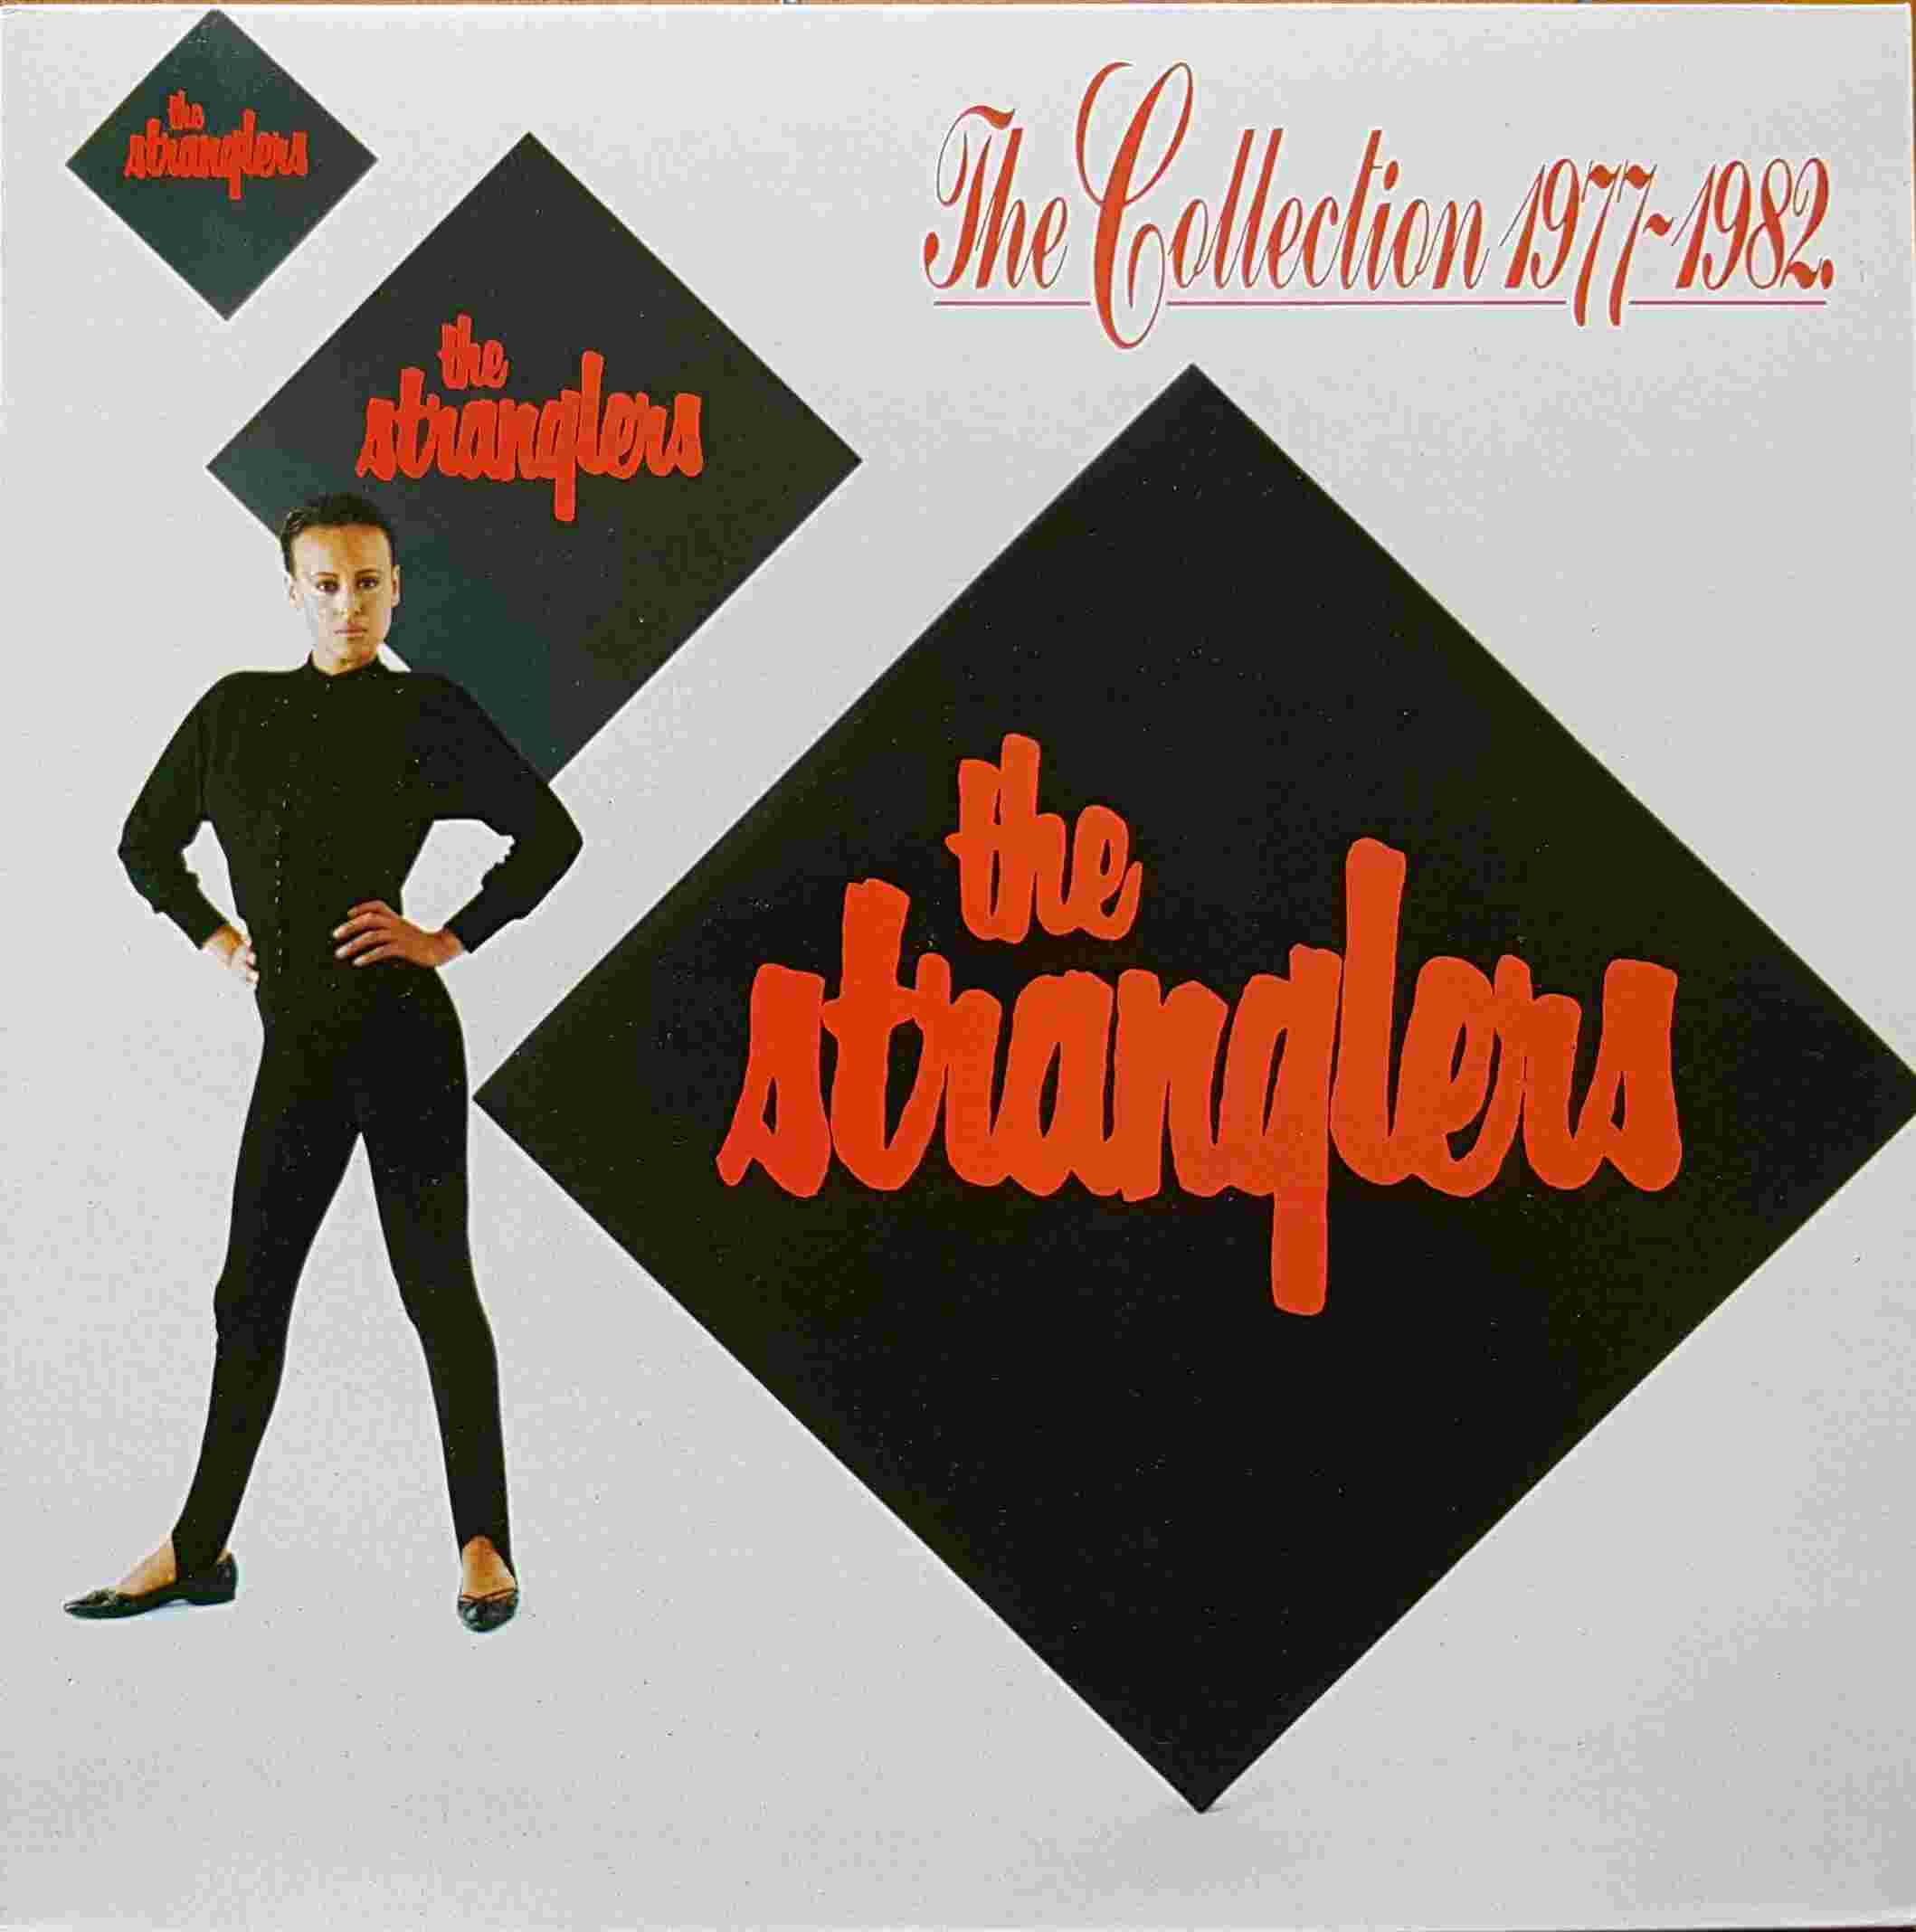 Picture of FA 3230 The collection 1977 - 1982 by artist The Stranglers from The Stranglers